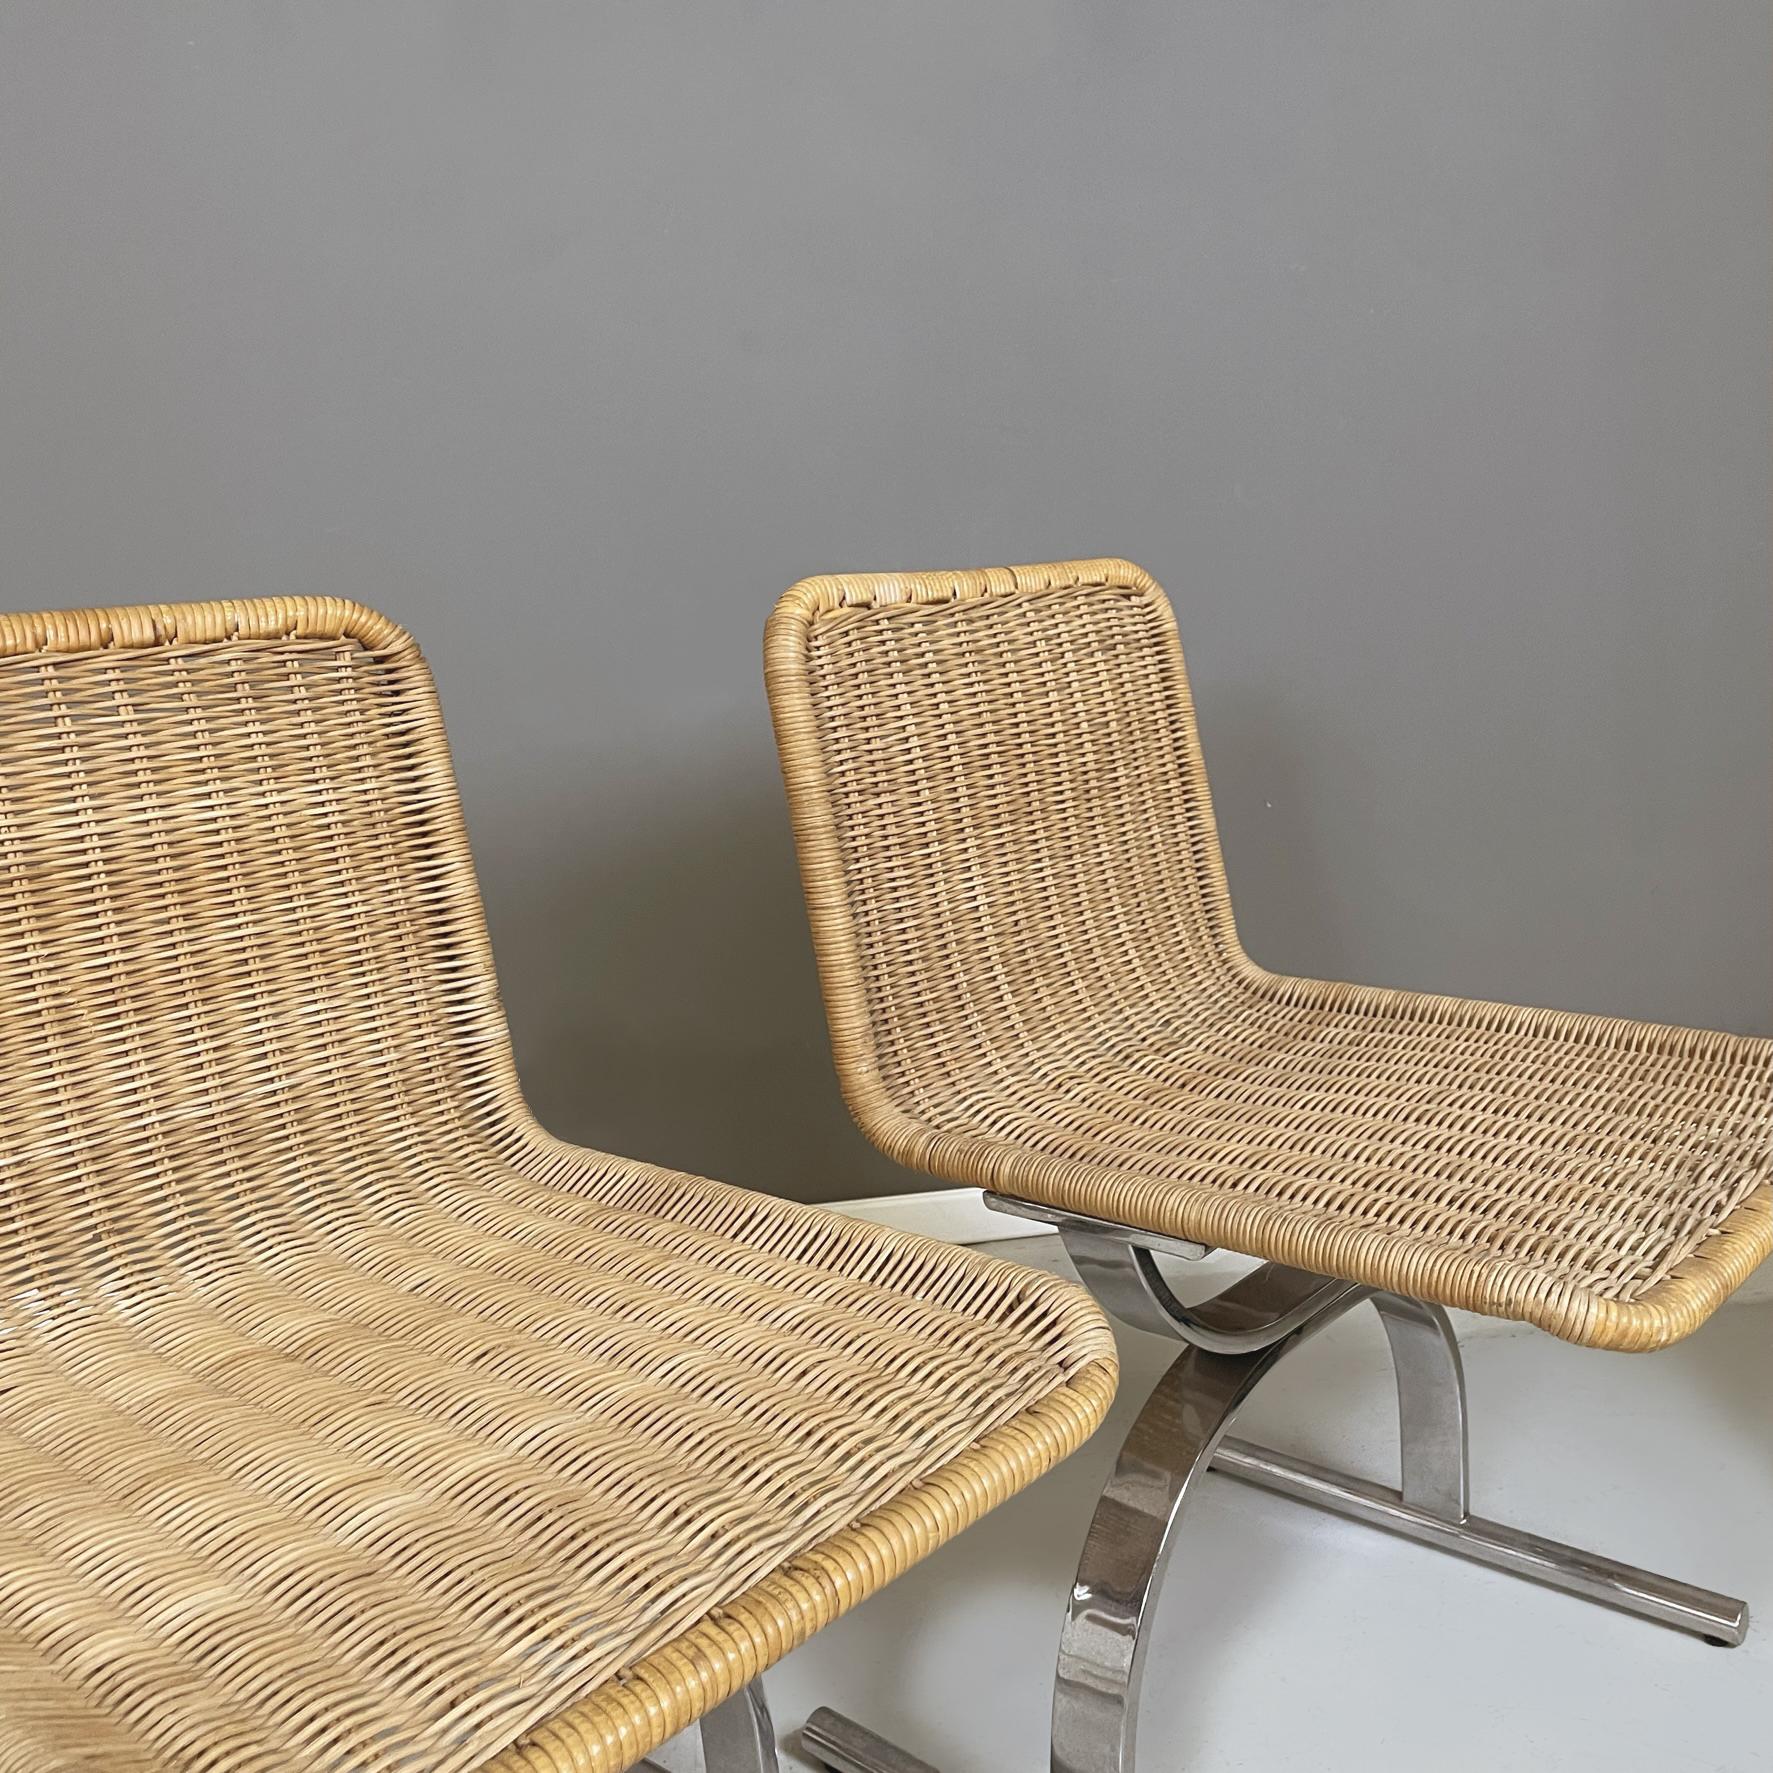 Italian space age modern Chairs in straw and steel, 1970s For Sale 1